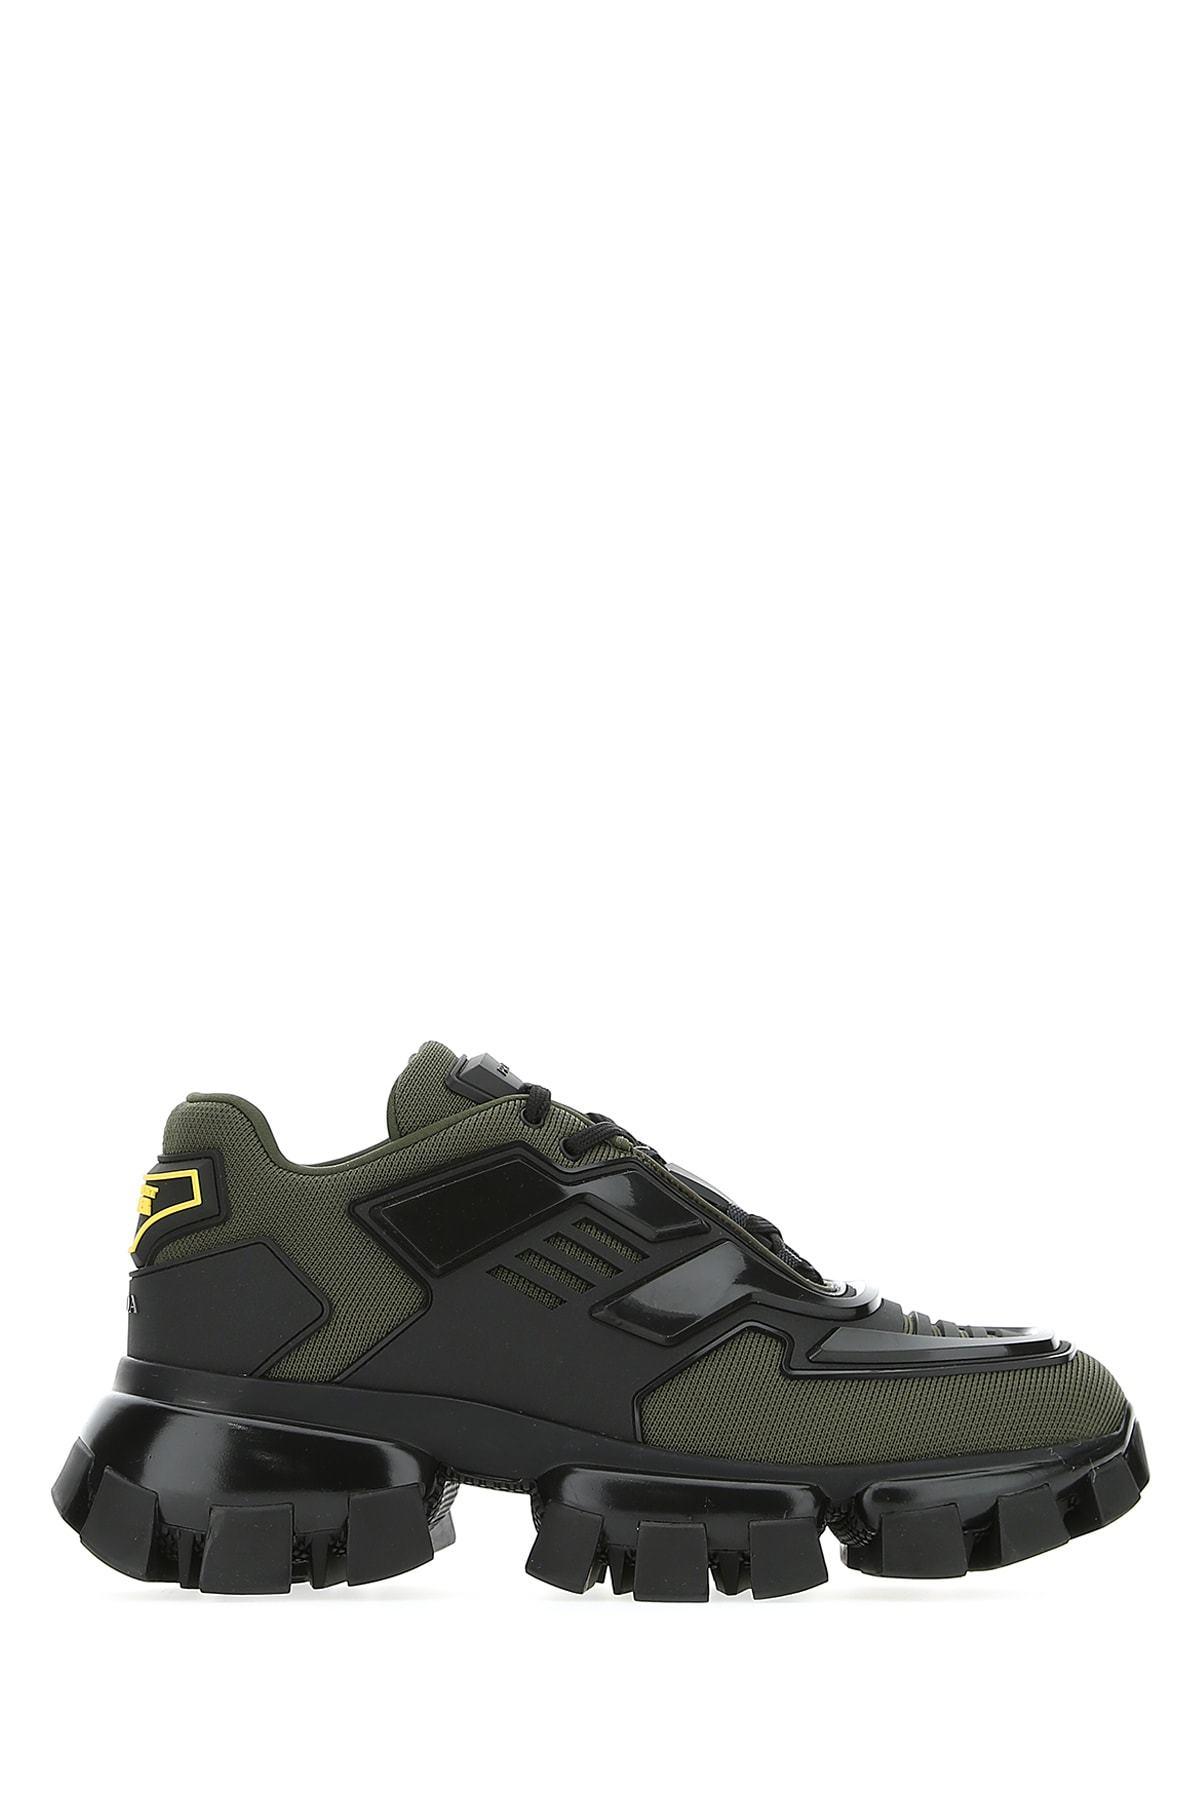 Prada Synthetic Cloudbust Thunder Sawtooth Sole Sneakers in Green - Lyst